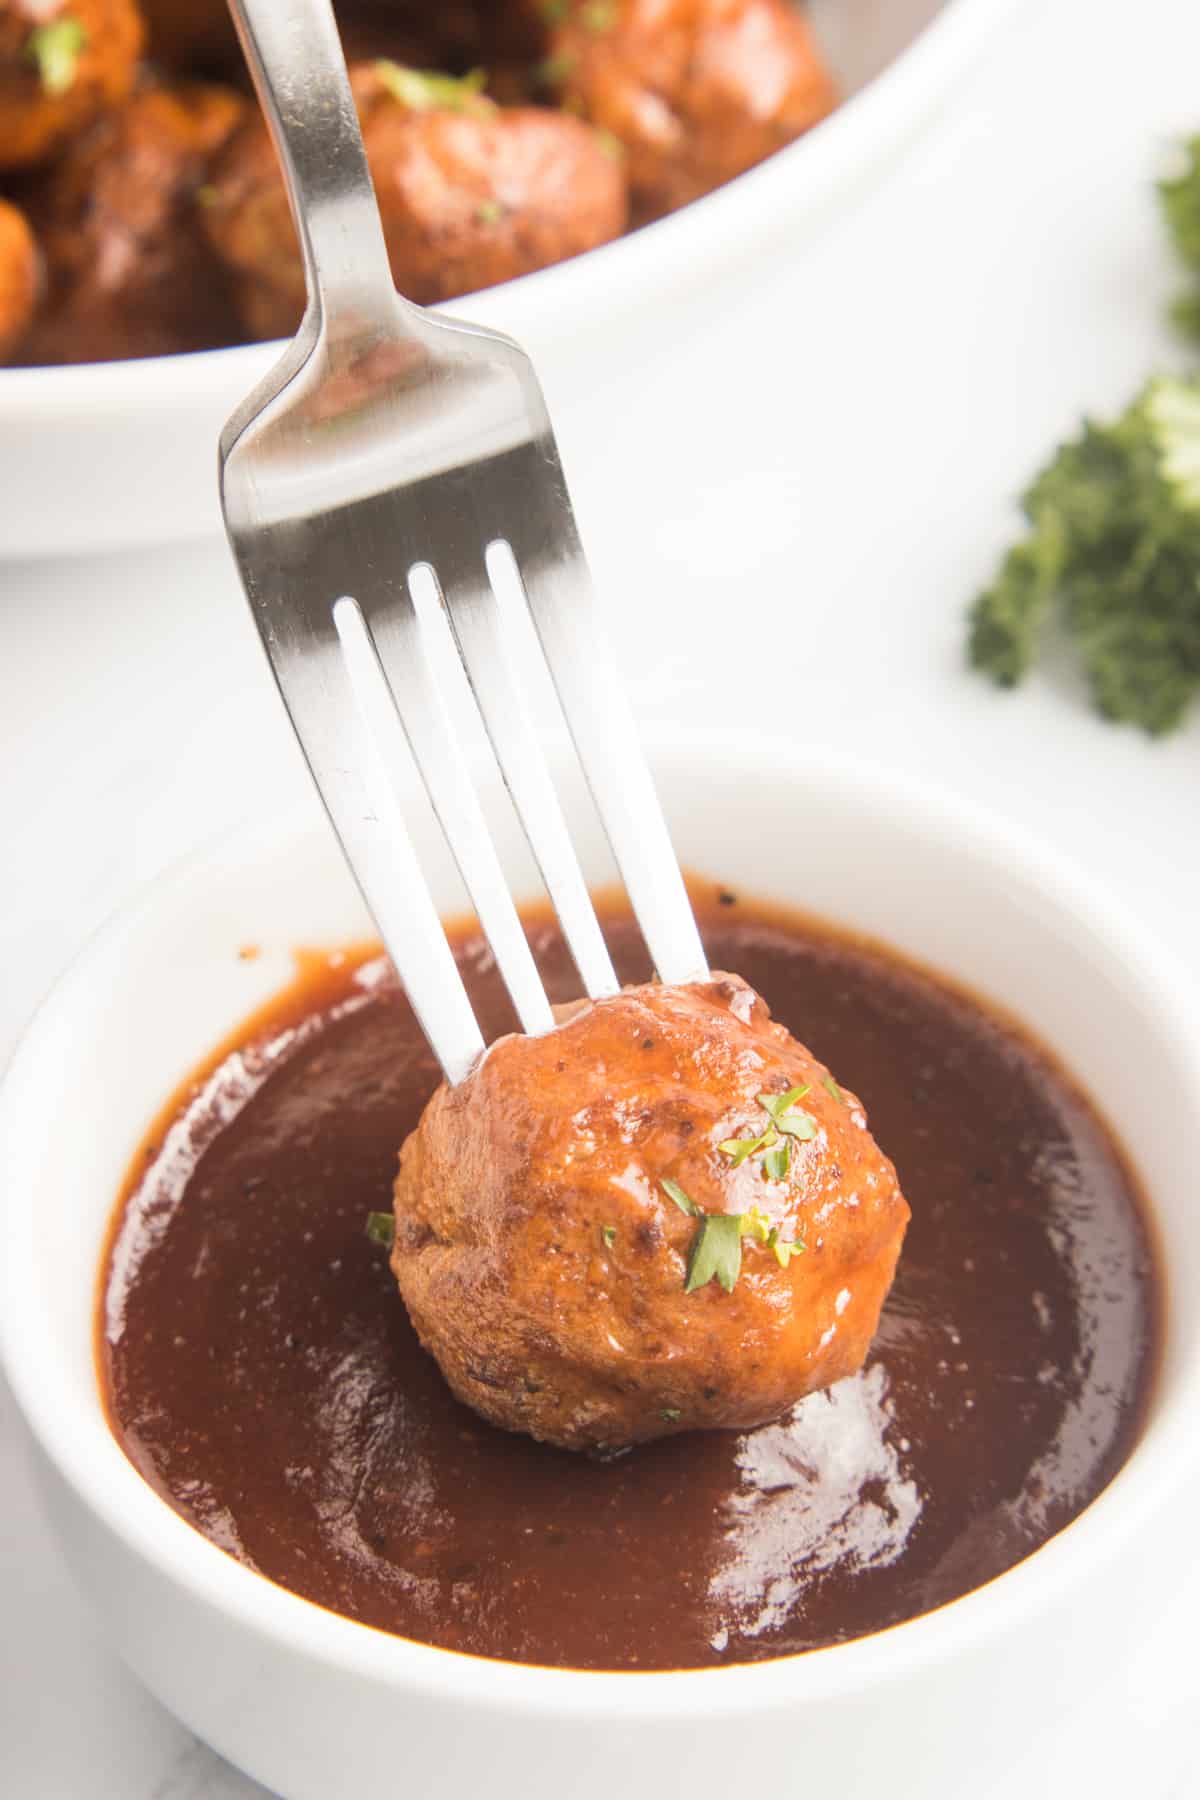 The image captures a single meatball delicately perched on a fork, glistening with sauce as it is being dipped, with the sauce coating the meatball.